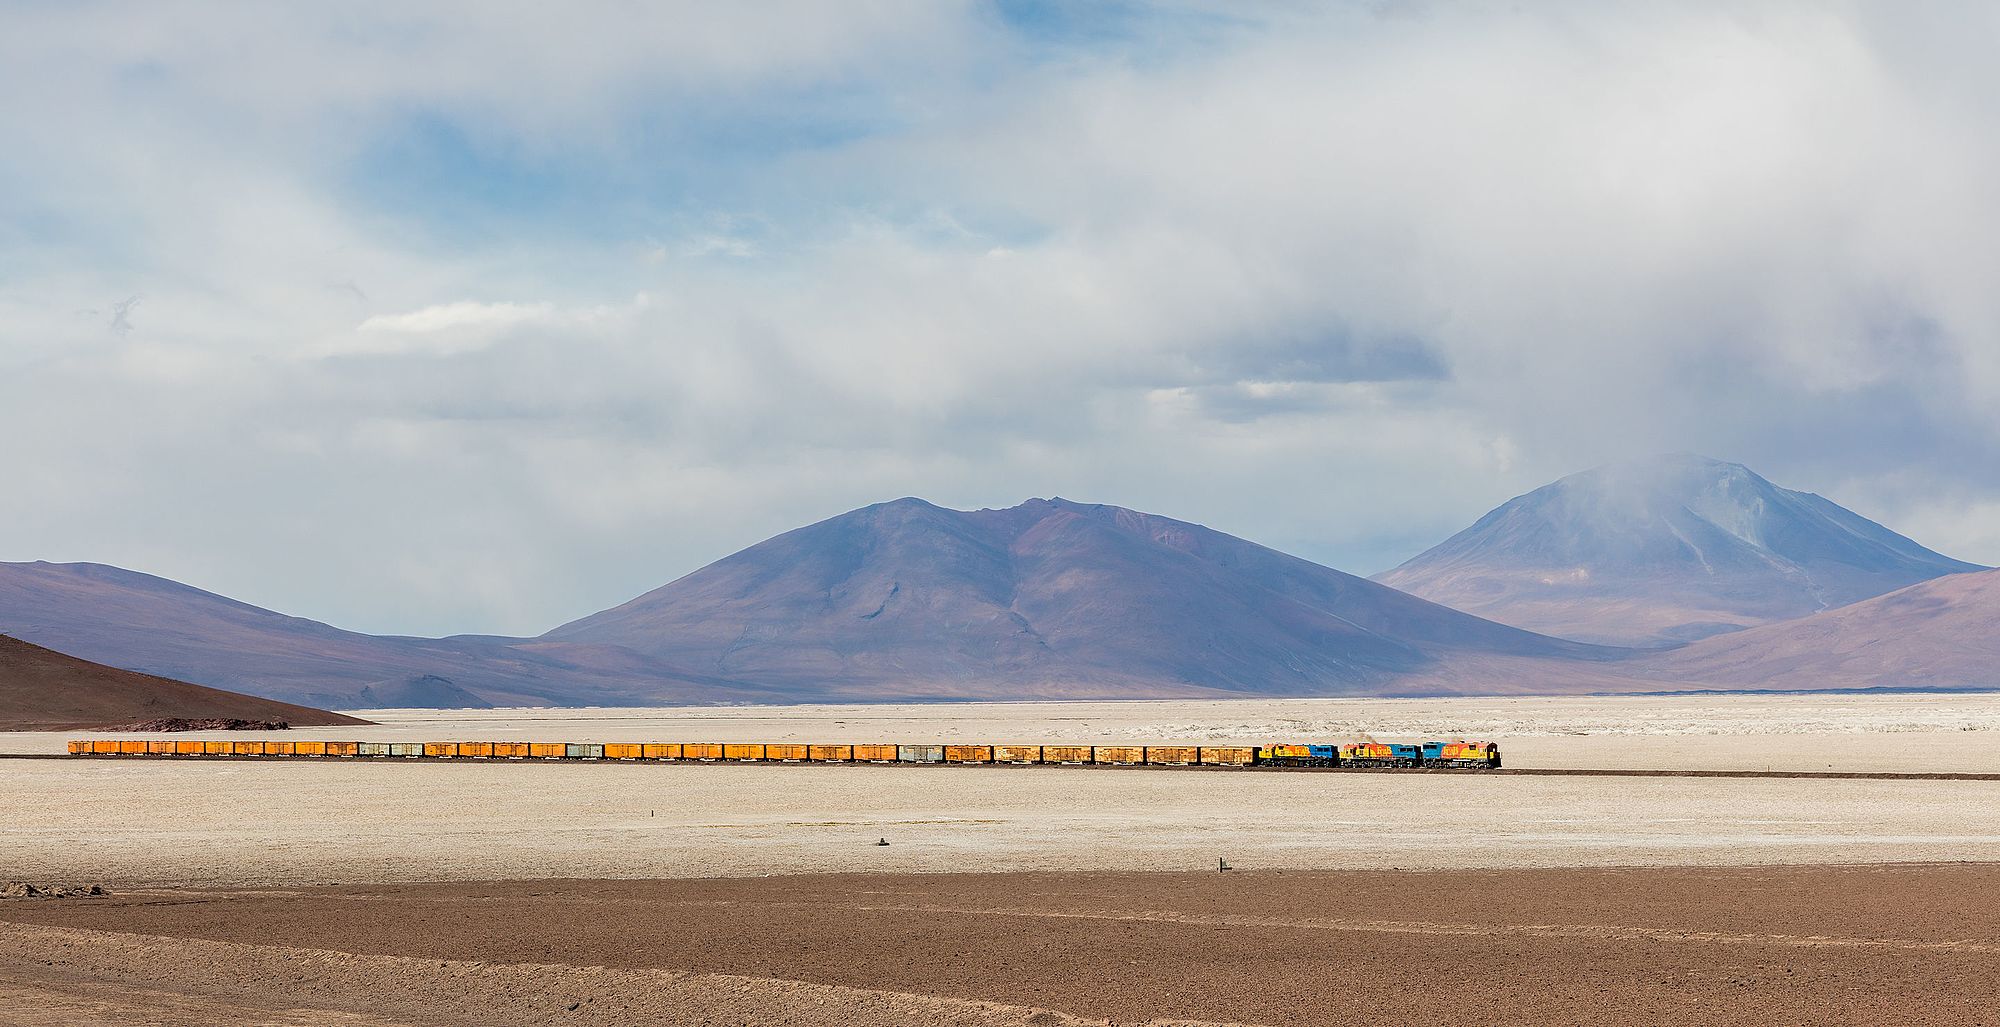 FCAB railway crossing the 35 kilometers (22 mi) long route over the west side of the Ascotán salt flat, southwestern Bolivia. The train covers the route Antofagasta - Calama - Ollagüe - Uyuni - La Paz, from 0 metres over the sea level in the coastal city of Antofagasta to over 4,500 metres (14,800 ft) in the area where the picture was taken (exactly in Collahuasi) and has a total length of 1,537 km (955 mi). The locomotives have engines EMD GT22CU-3 2406, Clyde GL26C-2 2009 and Clyde GL26C-2 2004 whereas the Ascotán salt flat has a surface of 246 square kilometers (95 sq mi).